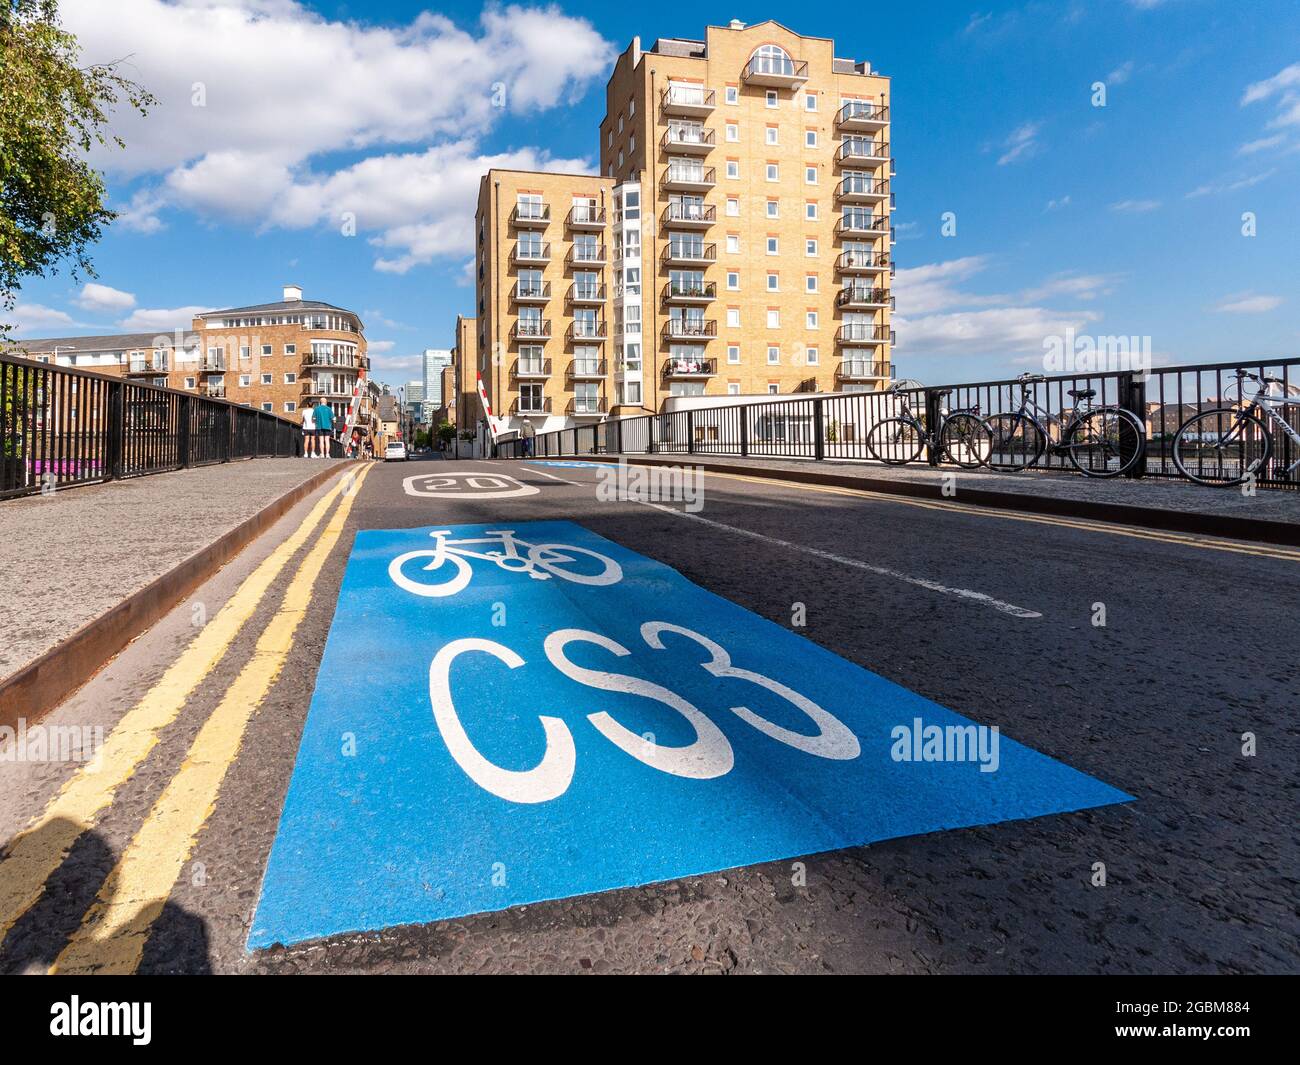 London, England, UK - June 20, 2010: A sign for the new "Cycle Superhighway 3" cycle route is painted on the carriageway of Narrow Street in Limehouse Stock Photo